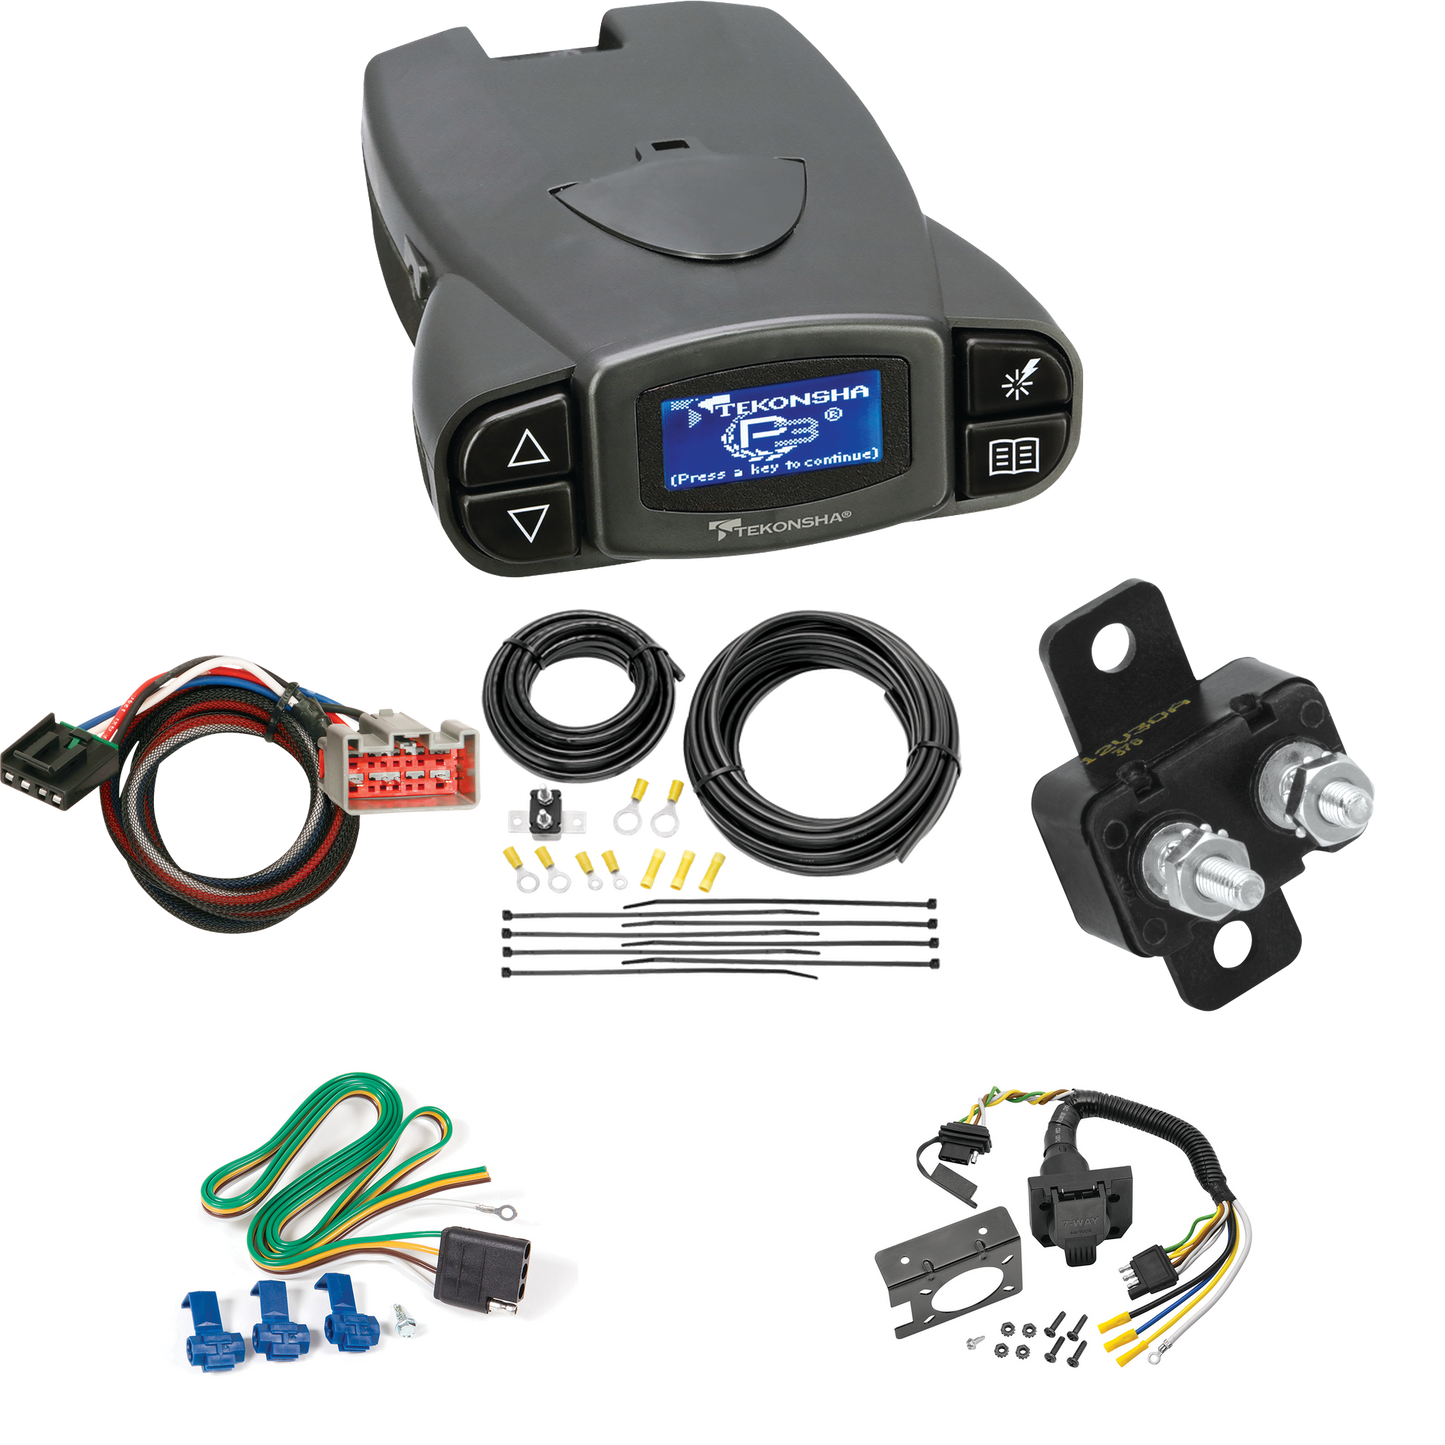 Fits 2022-2023 Ford F-150 7-Way RV Wiring + Tekonsha Prodigy P3 Brake Control + Plug & Play BC Adapter By Reese Towpower